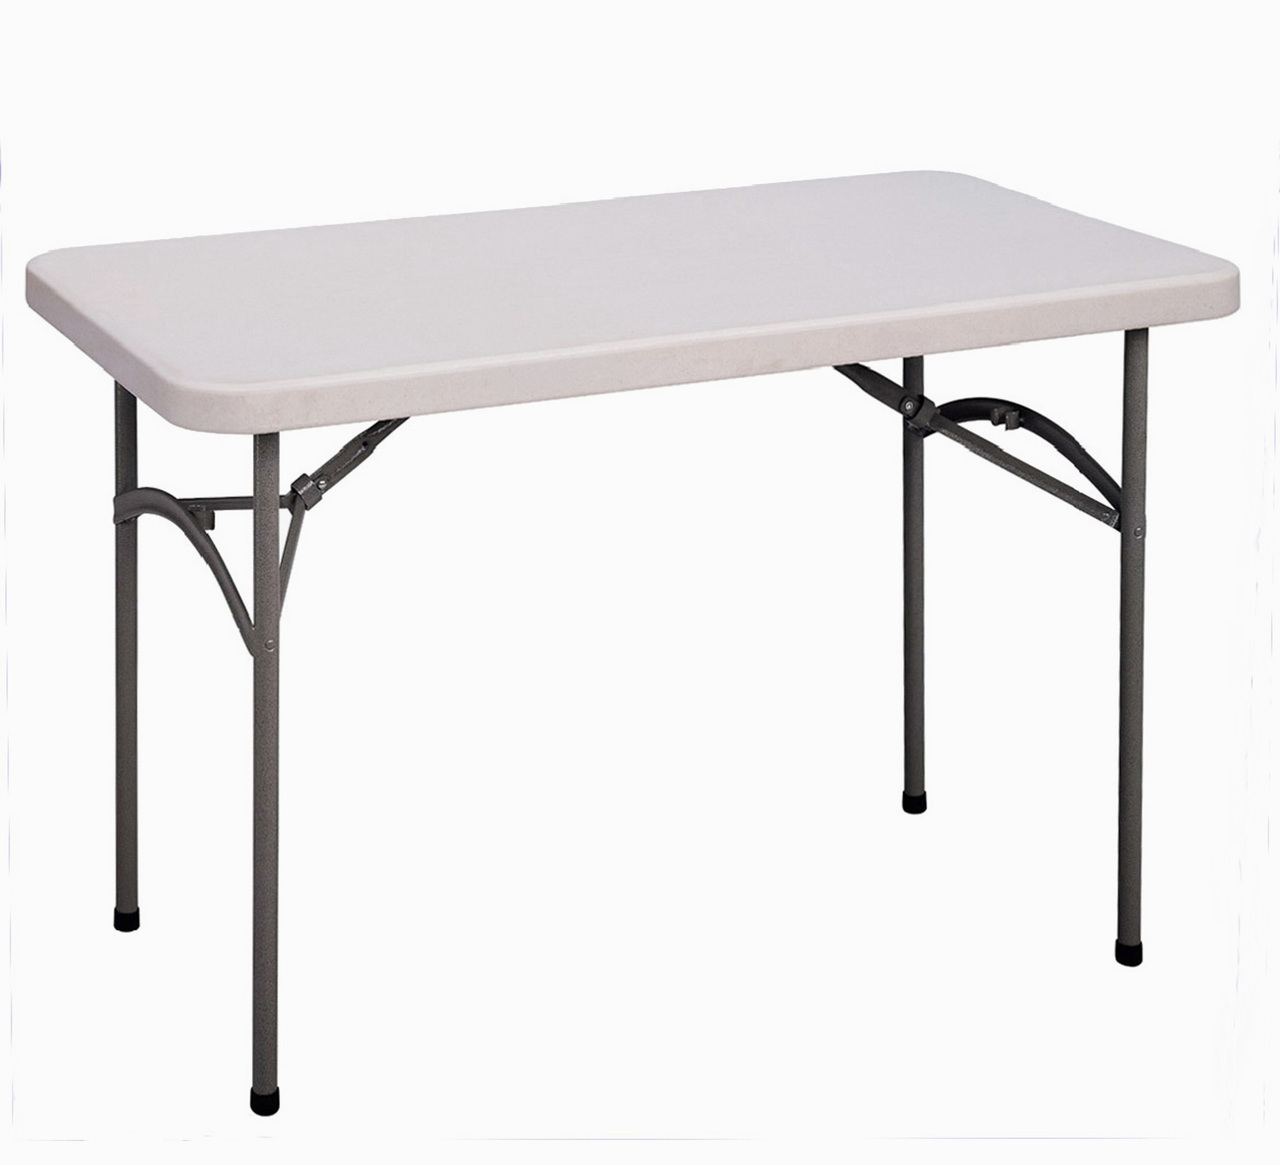 Correll CP2448 CP Series Blow Molded Plastic Light Weight Economy Folding Table - 24 x 48